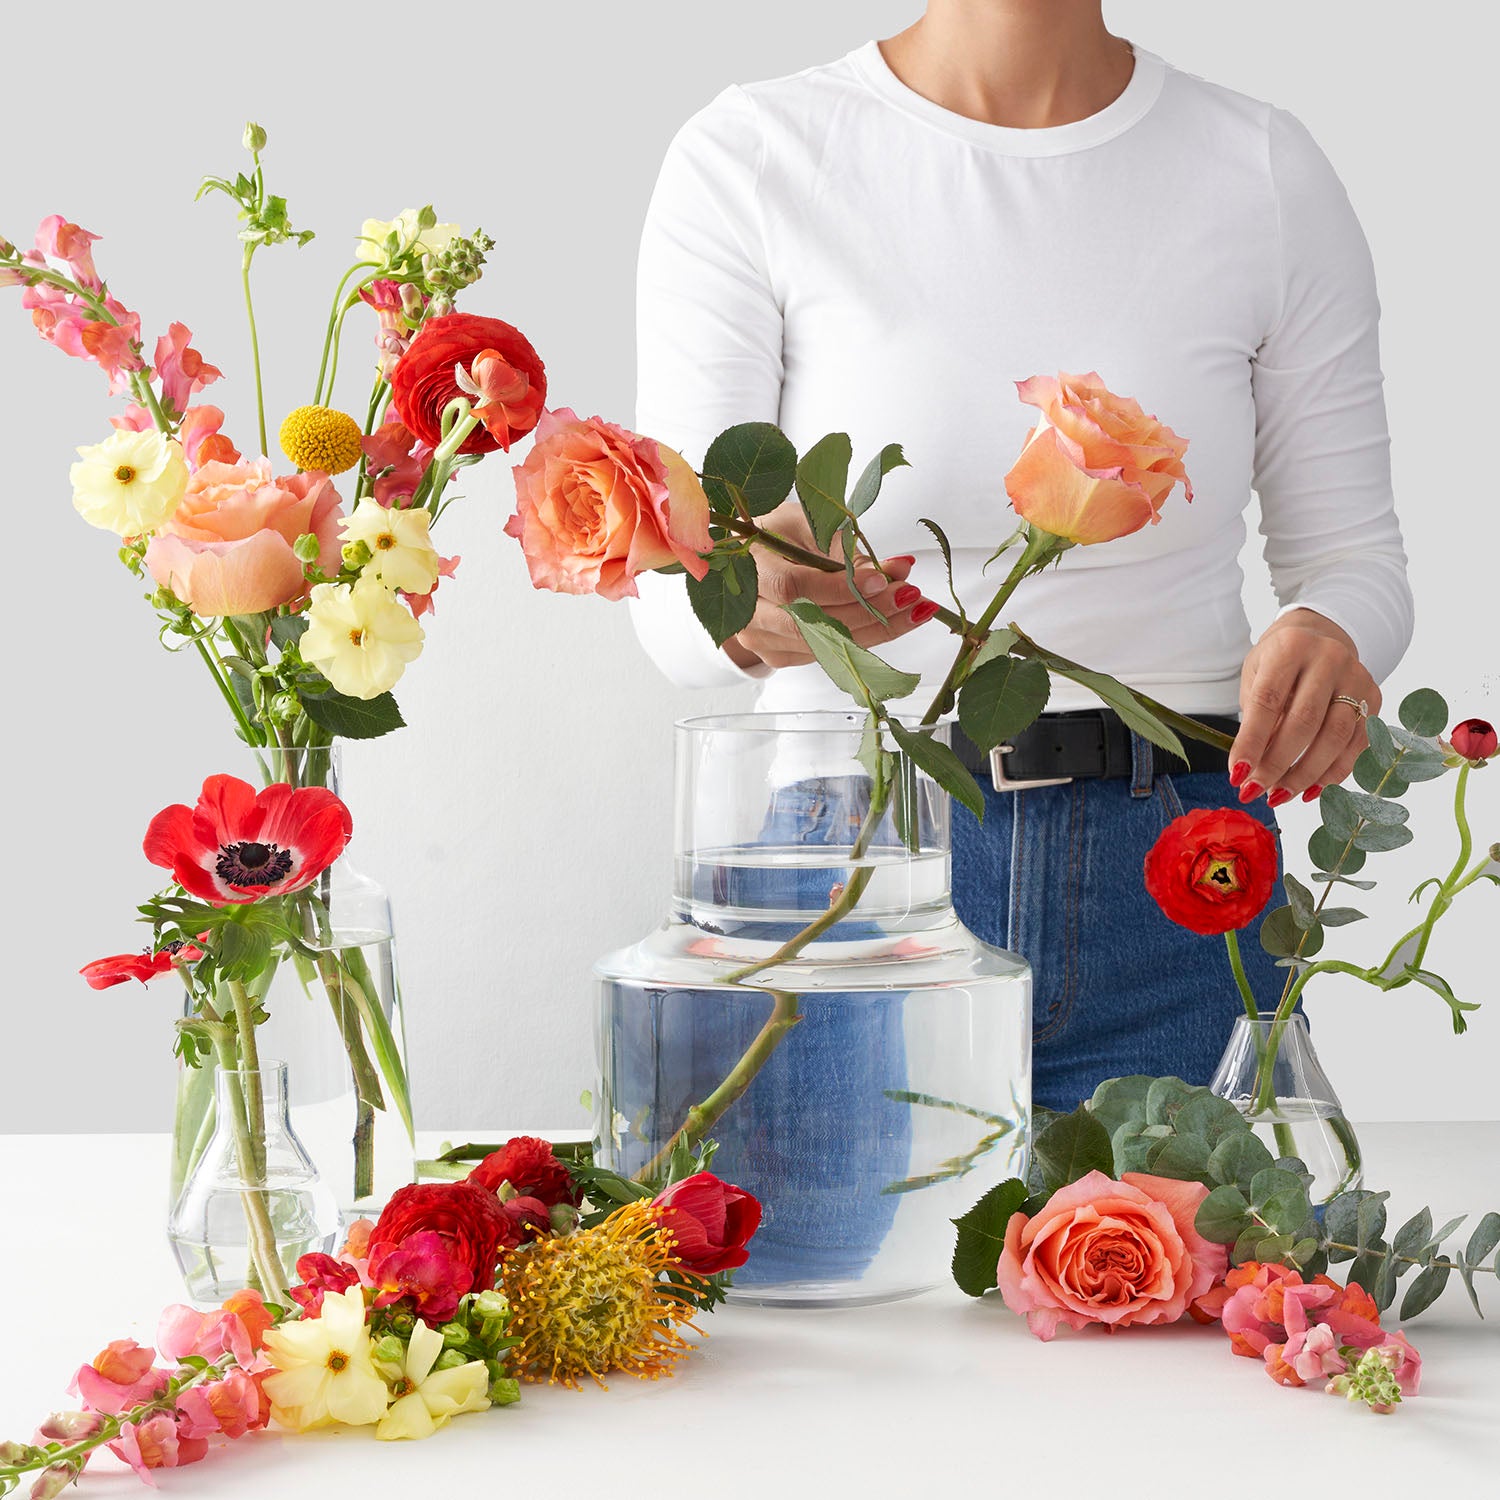 Woman in white shirt  and blue jeans stanfing behind white table holding clear glass vase full of water and mixed colourful flowers.